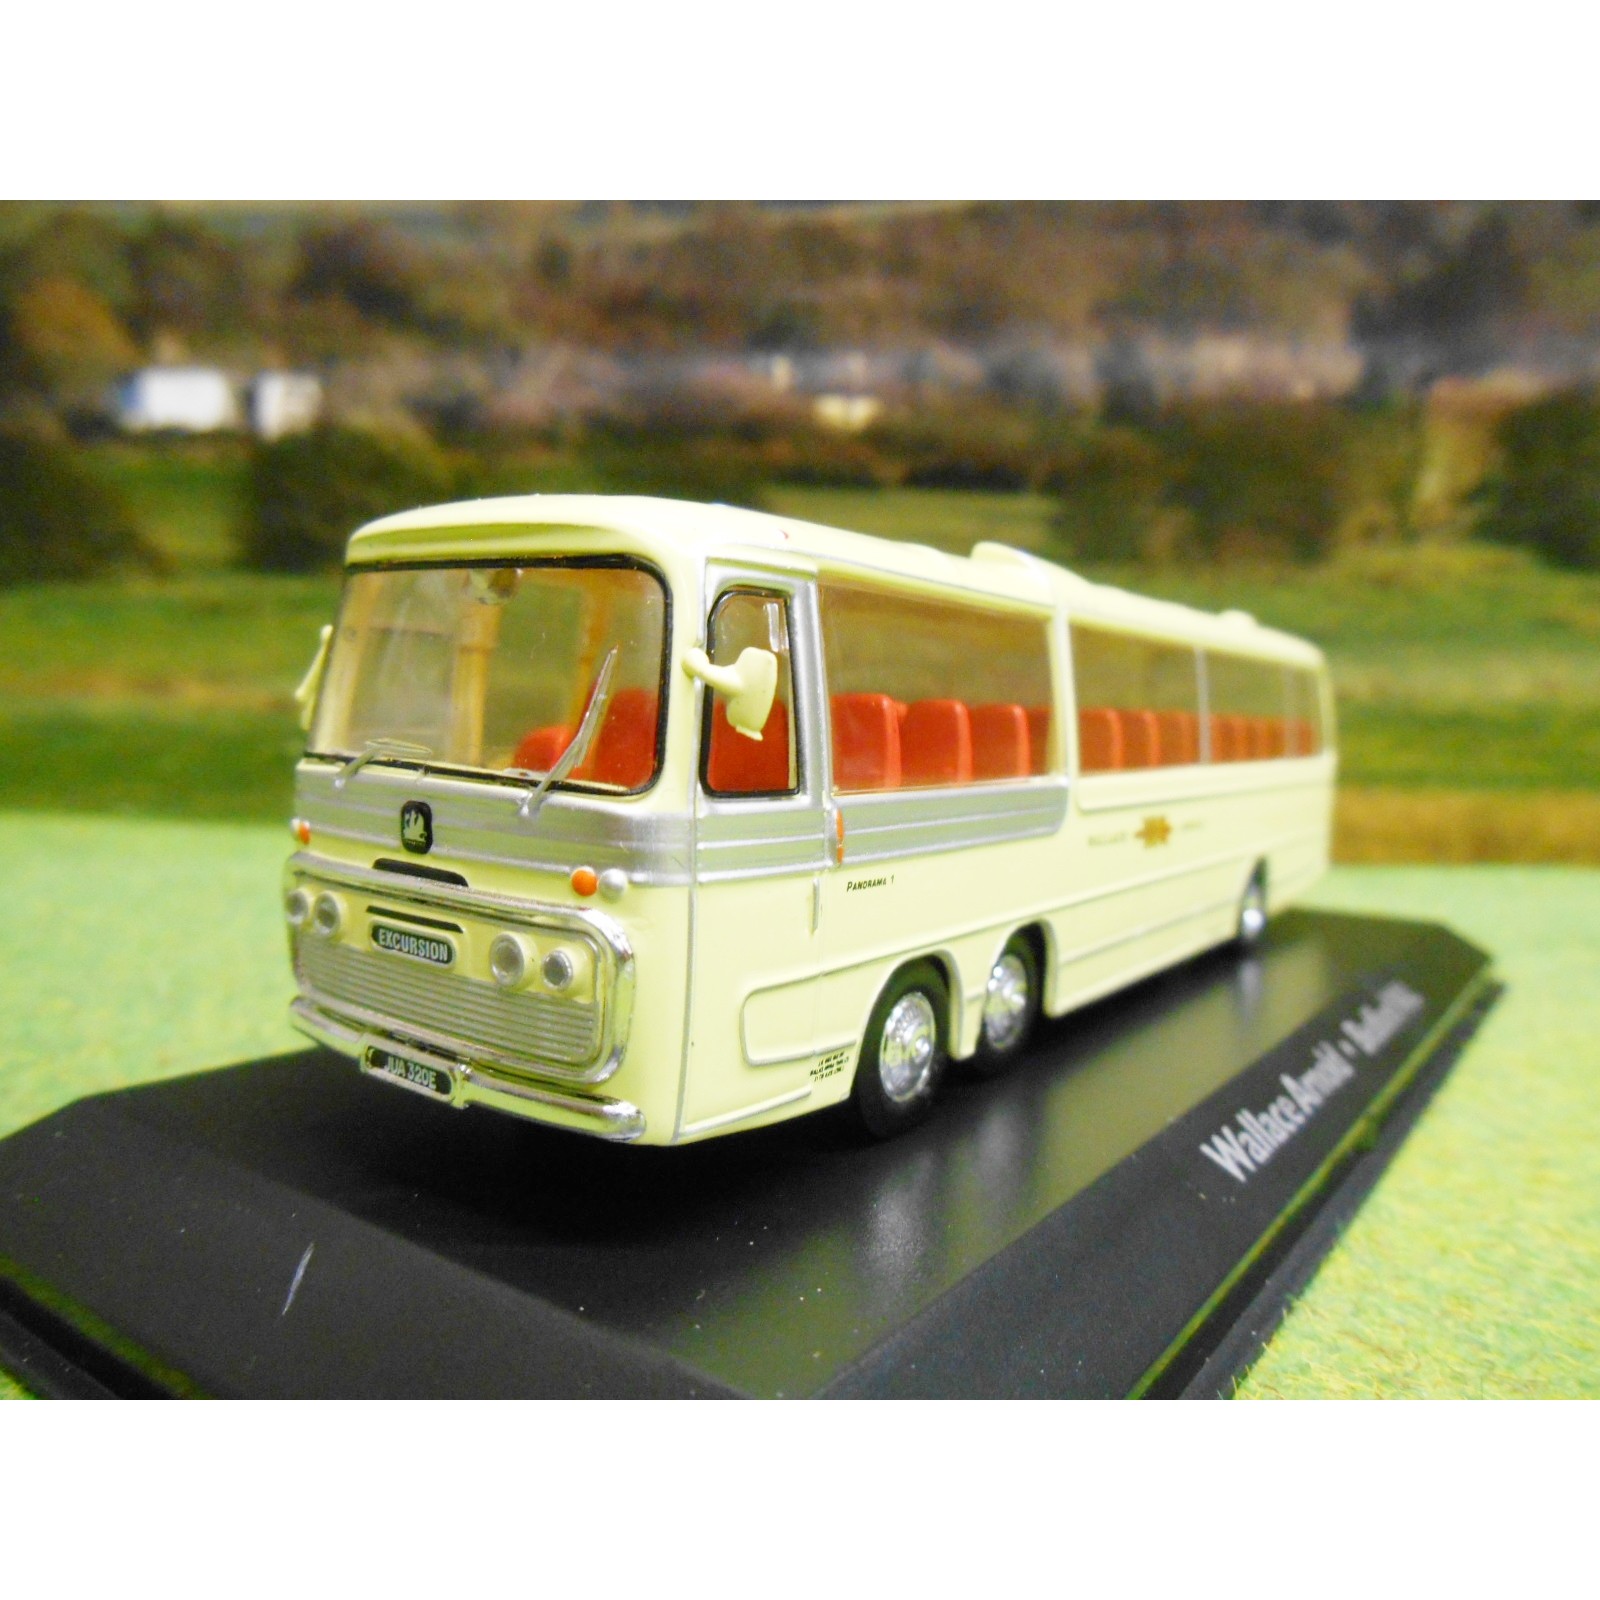 Details about   1:76 Scale Model Bedford VAL 1967 Plaxton Panorama Coach Wallace Arnold Bus EFE